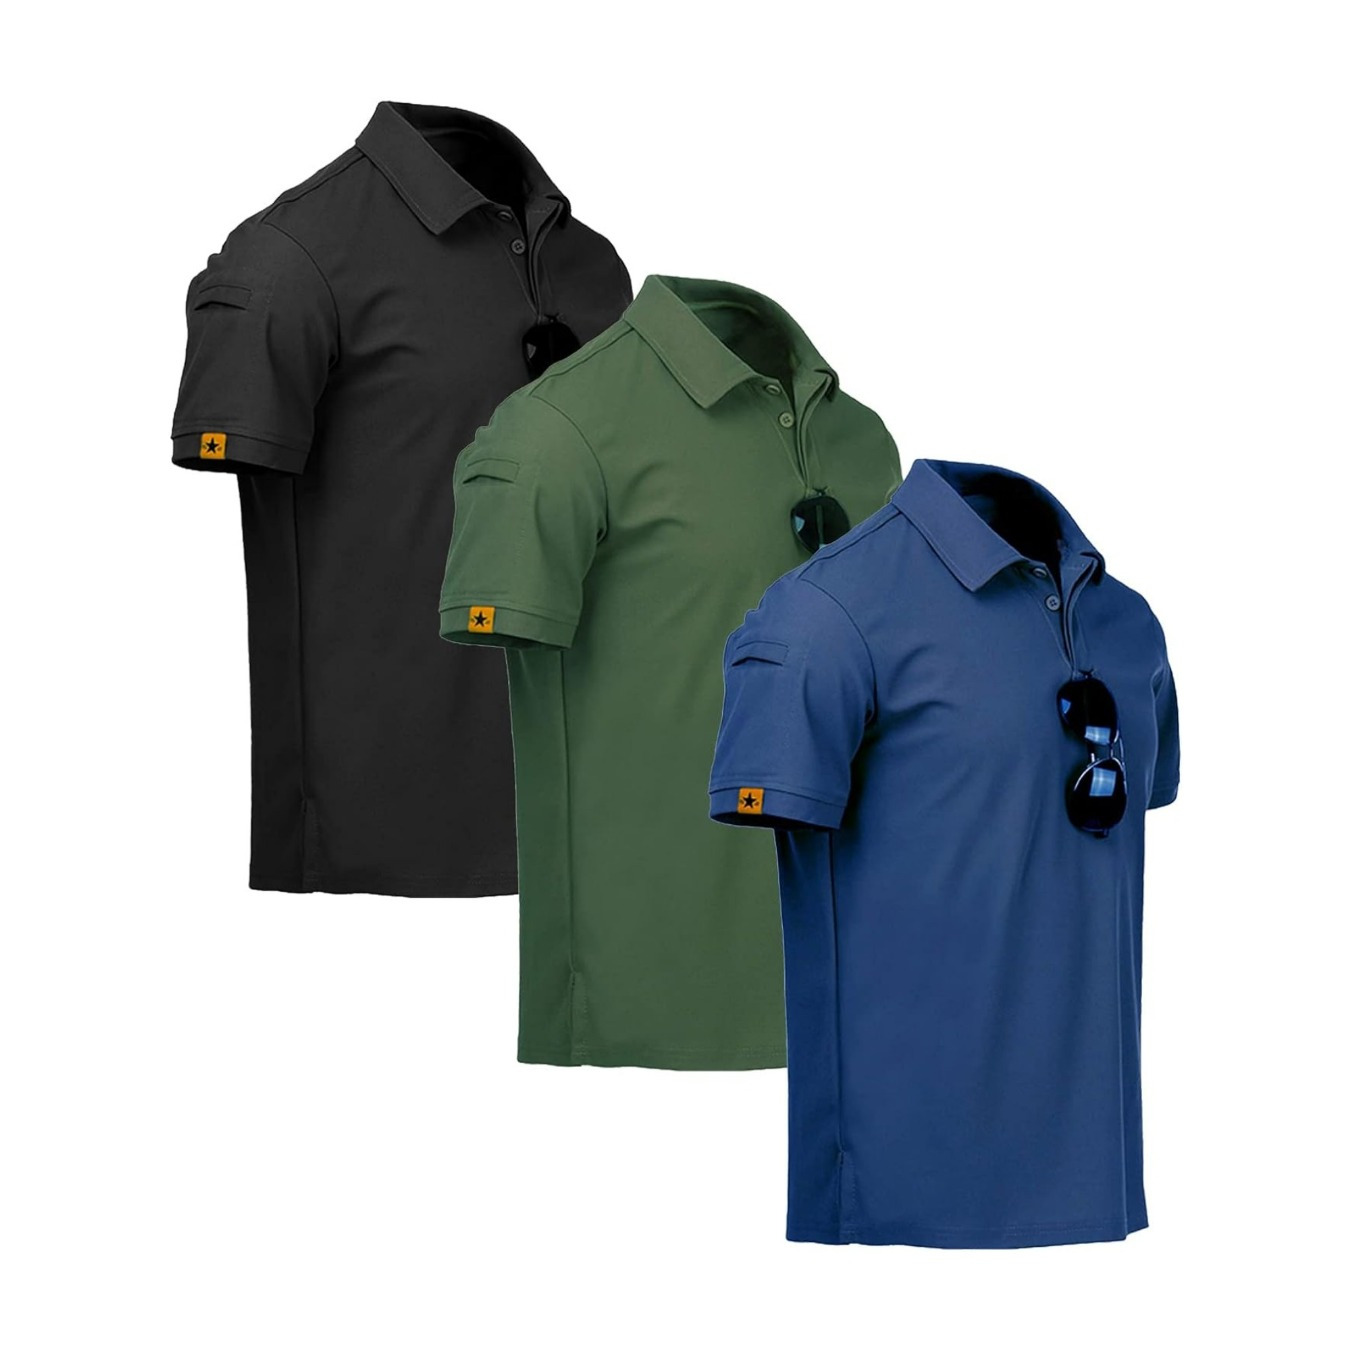 

3 Pack Mens Polo Shirts Quick-dry Cool Short Sleeve Sports Casual Tennis Golf Shirt For Men